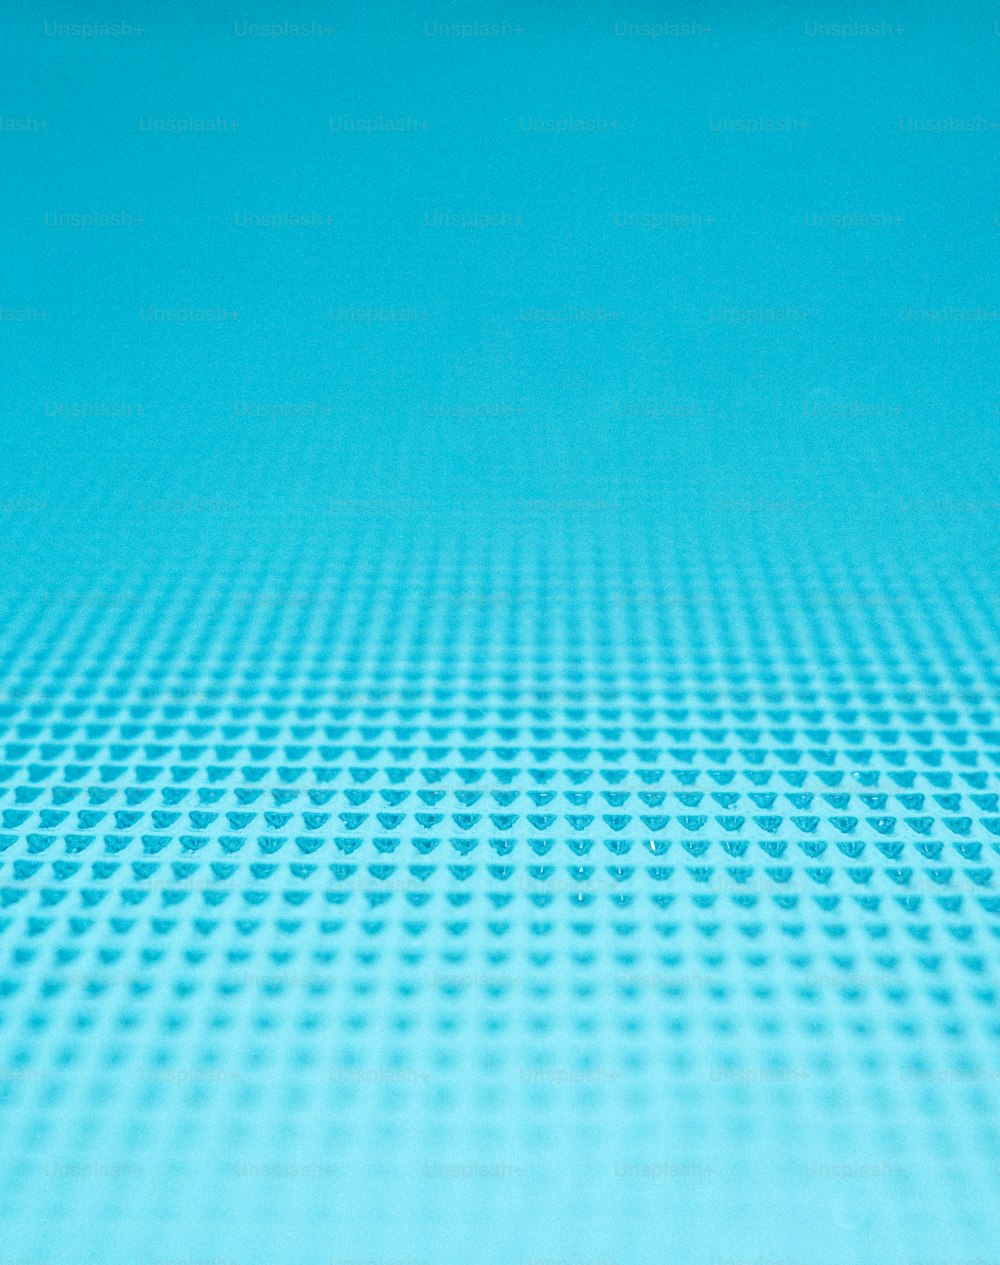 a close up of a blue surface with small circles